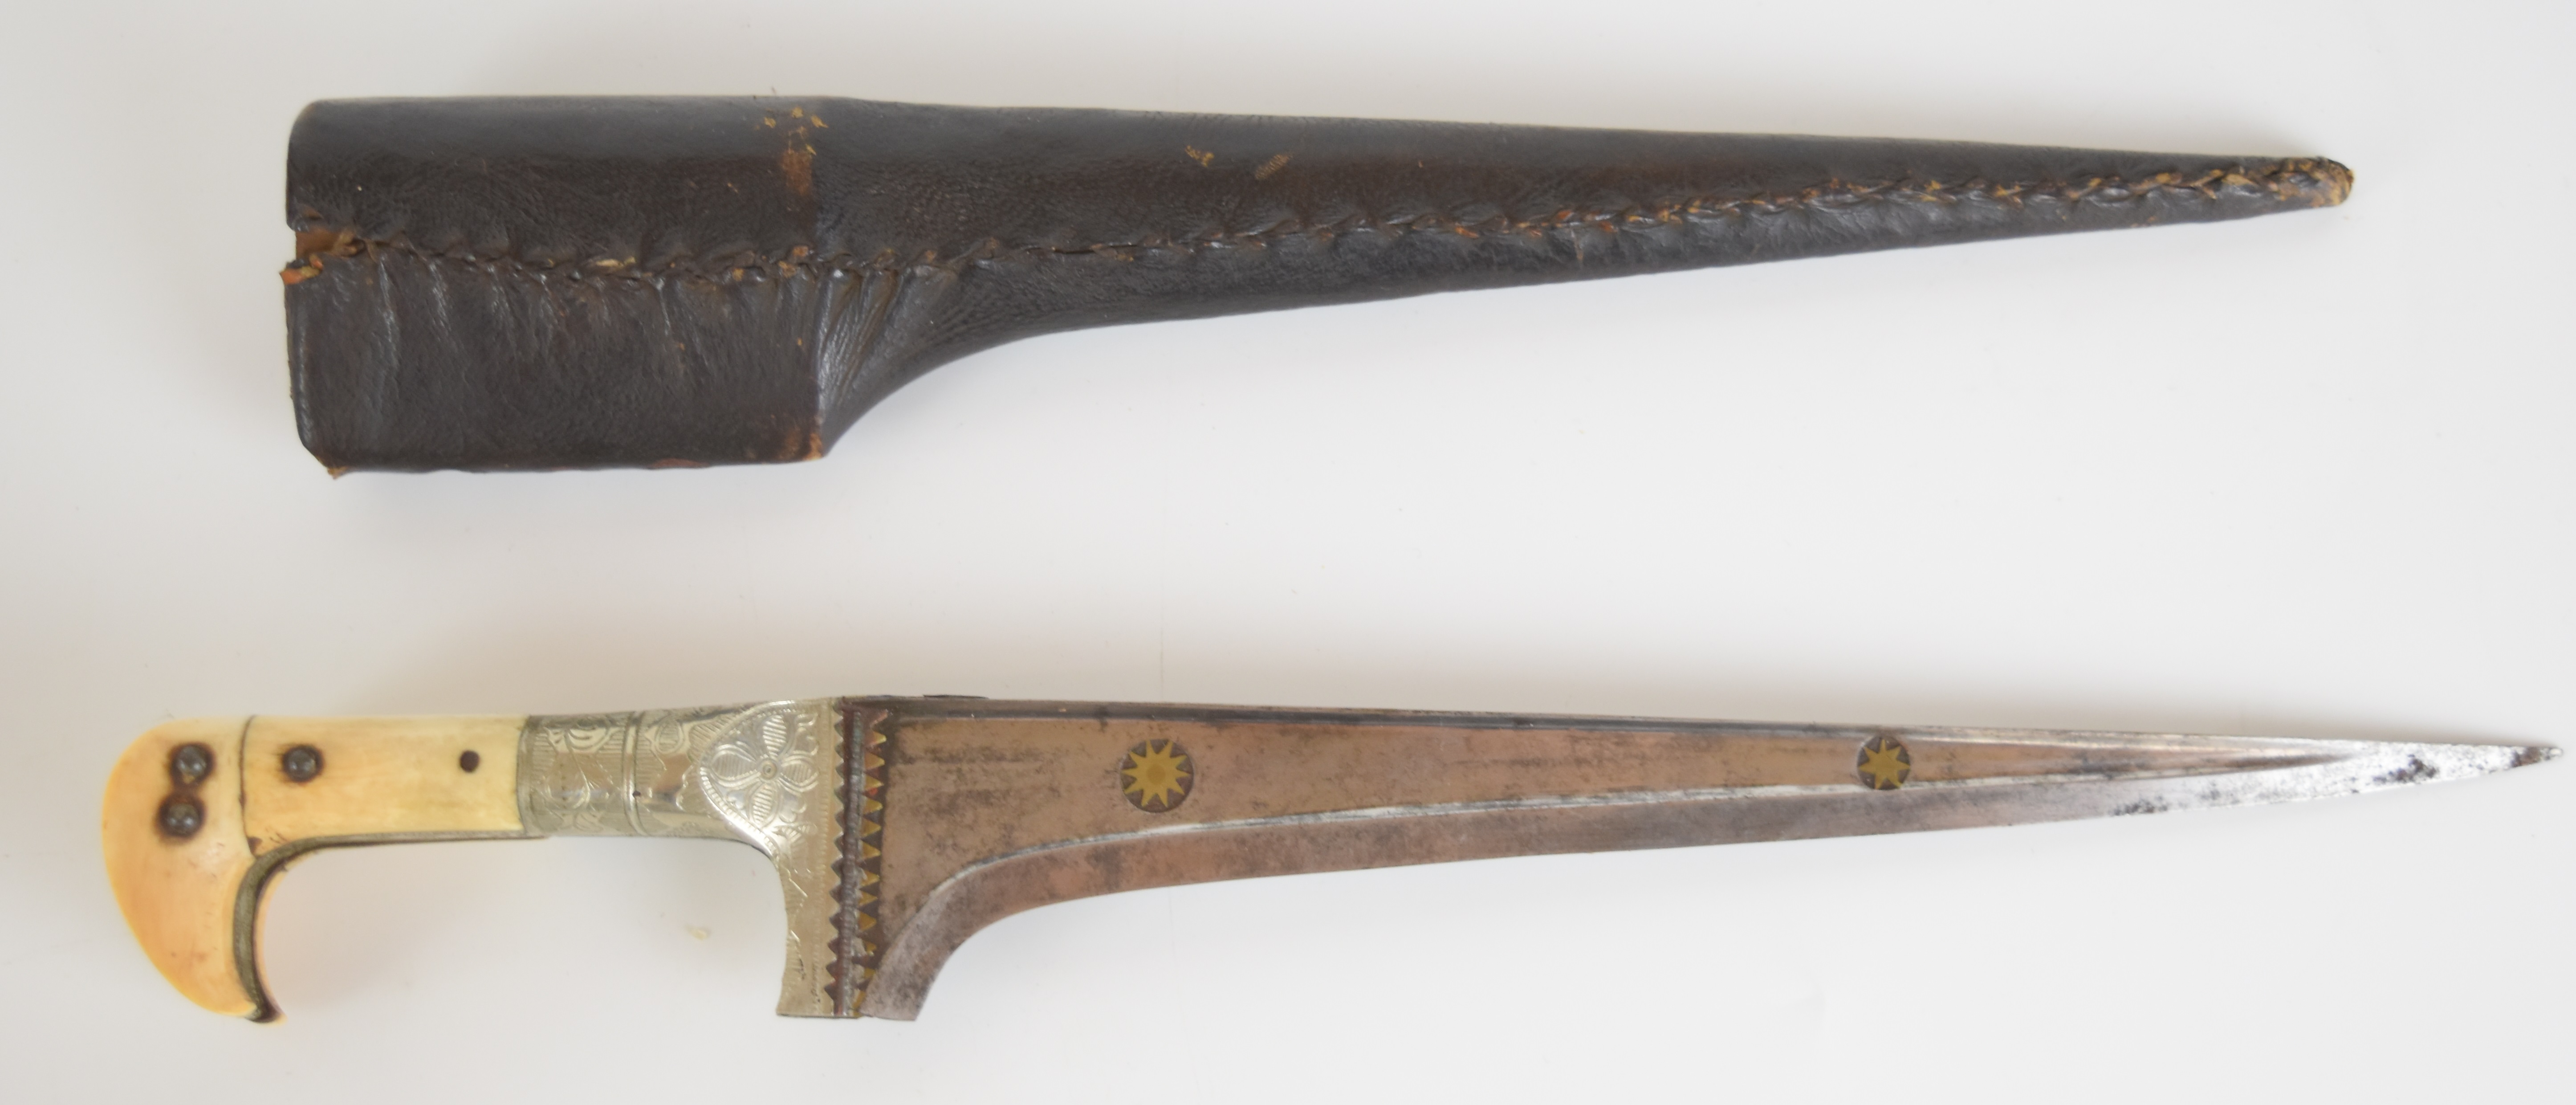 Indo Persian Pesh-Kabz knife or dagger with ivory grips to the curved handle, engraved decoration - Image 6 of 8